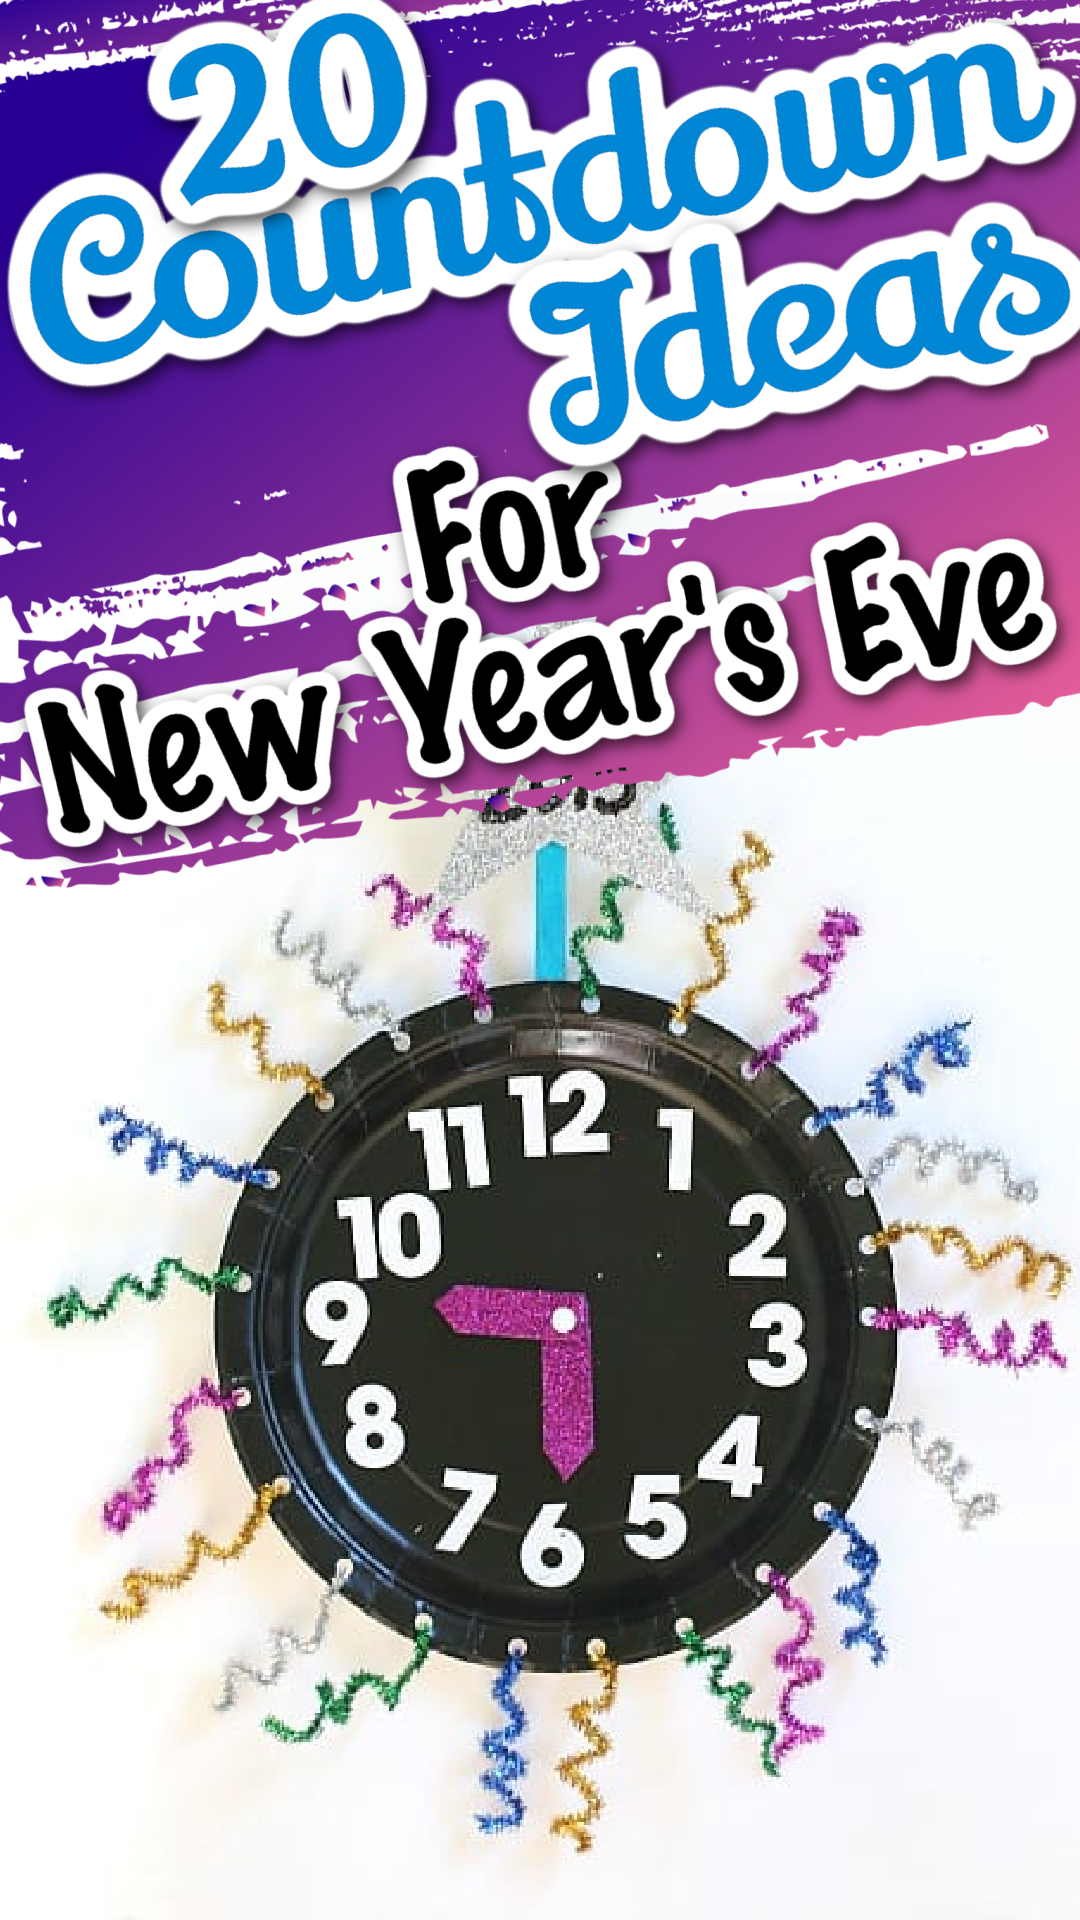 20 Countdown Ideas For New Year’s Eve